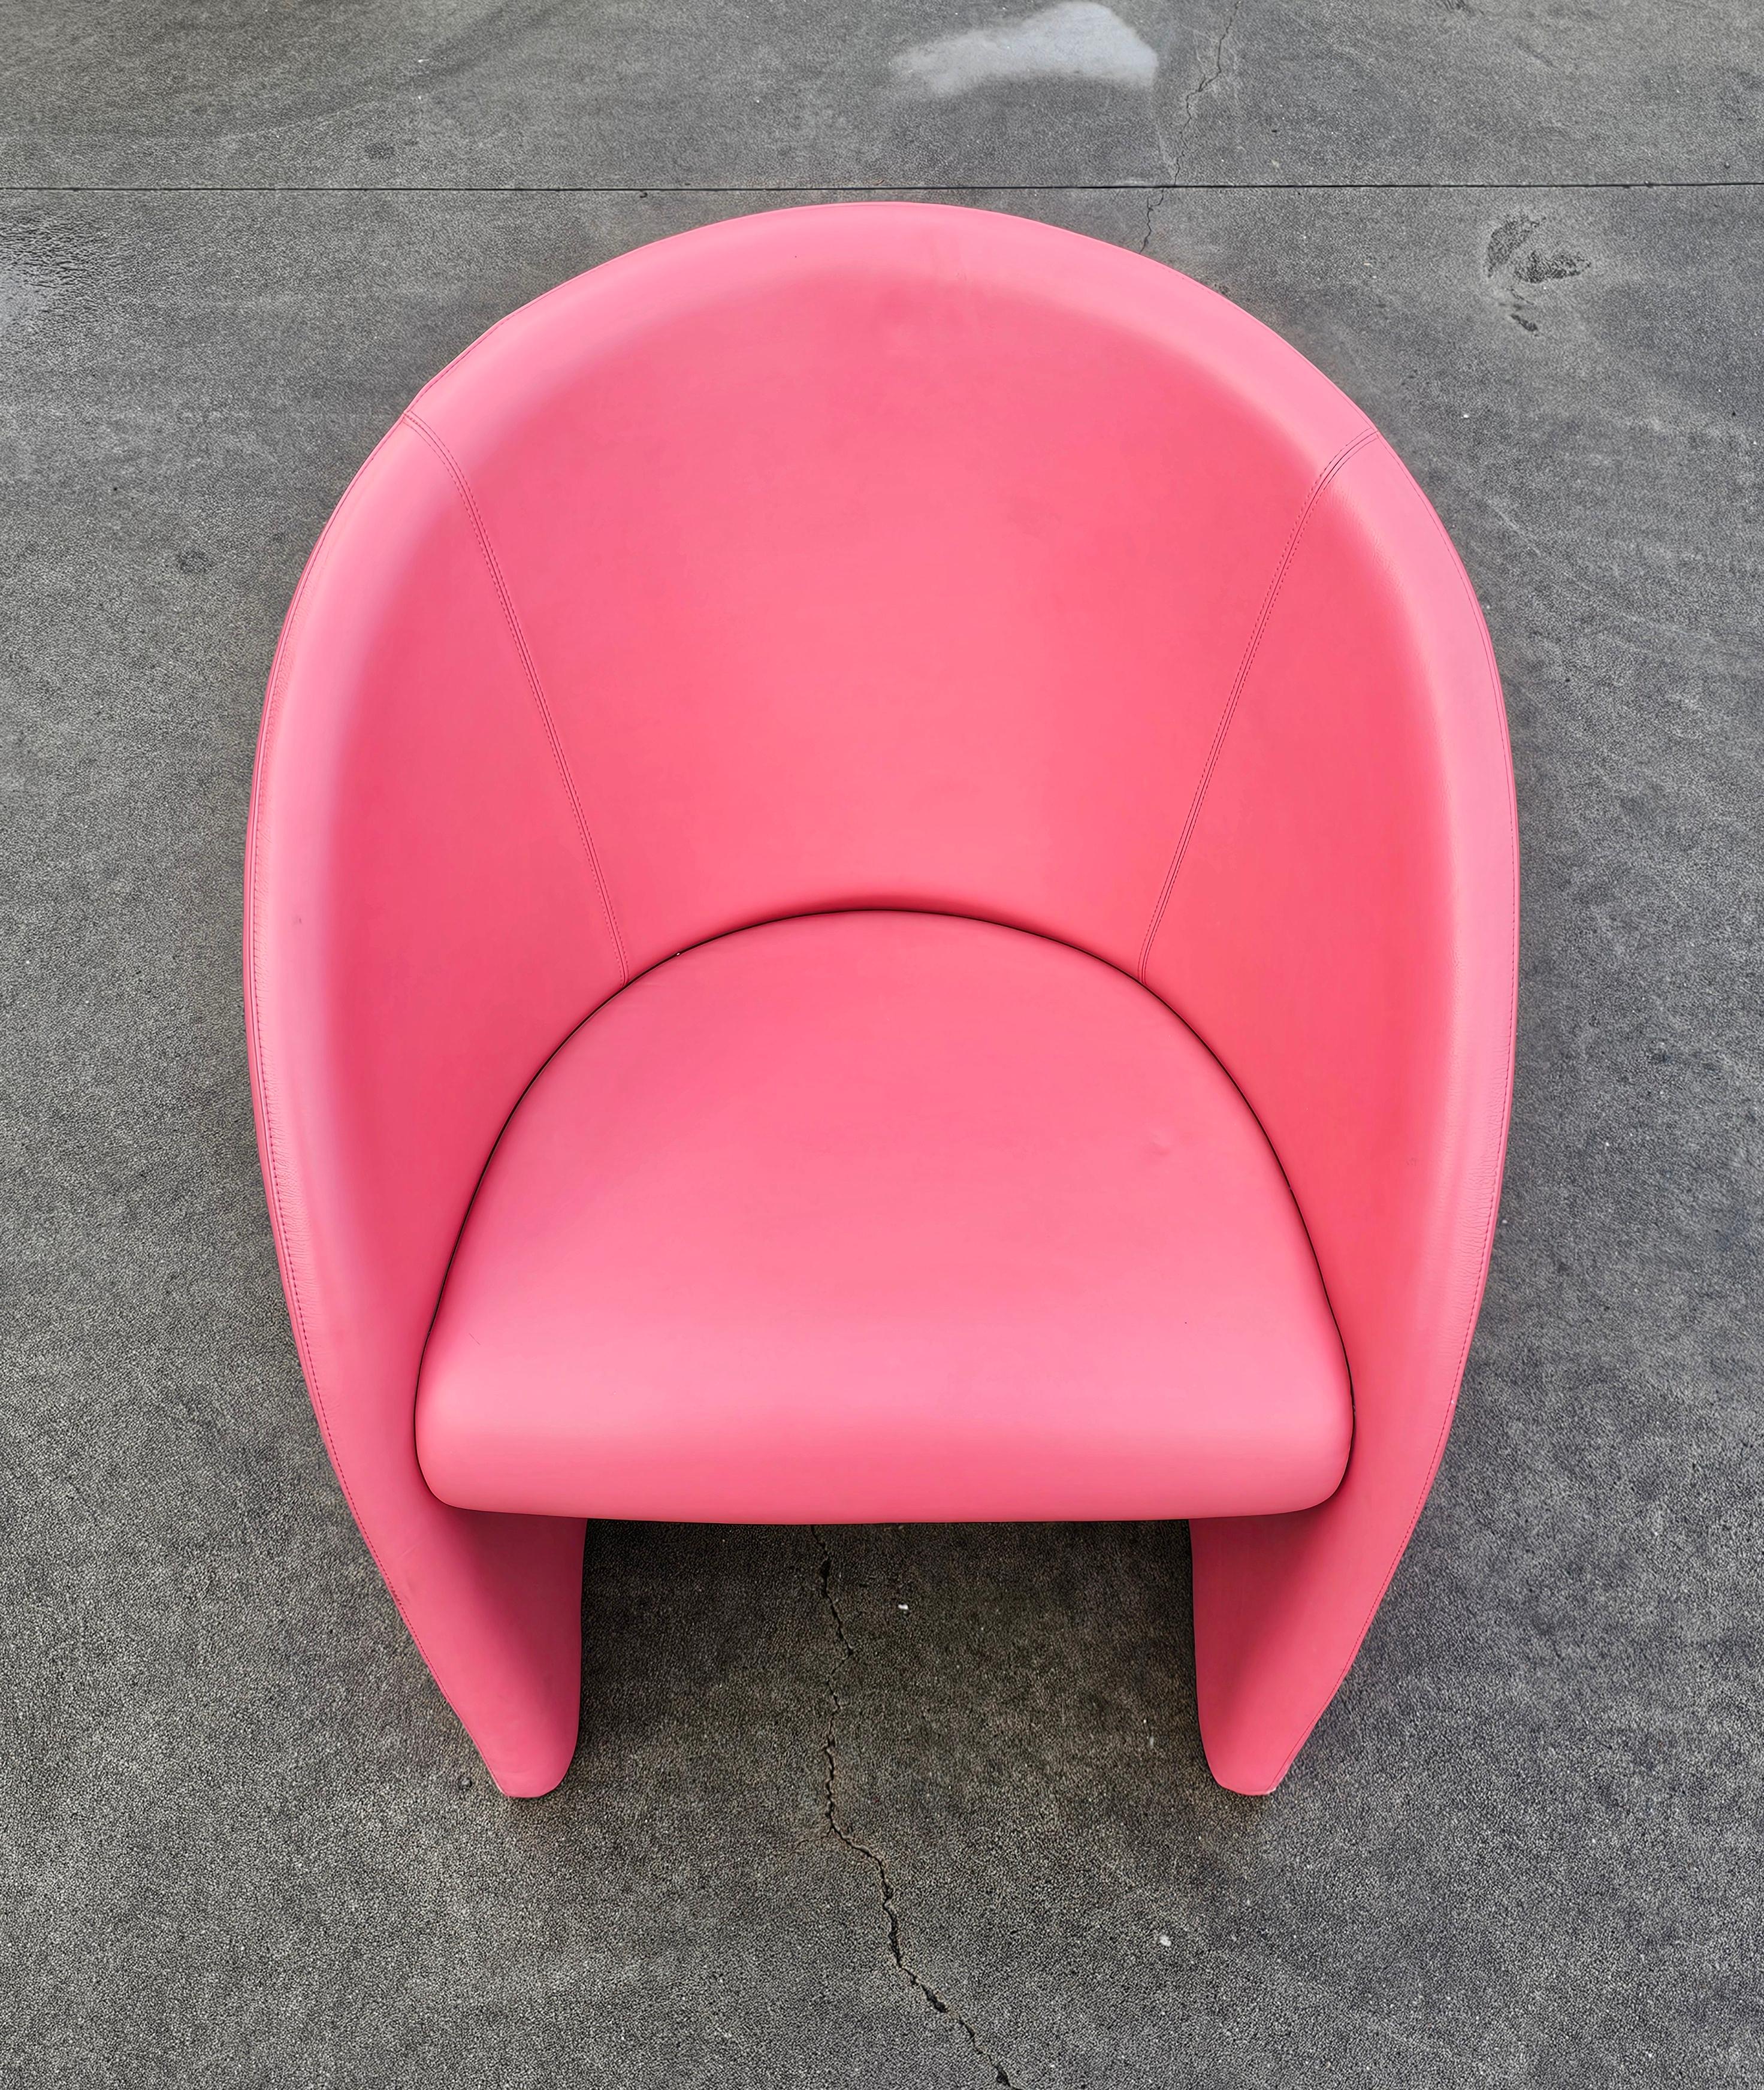 1 of 8 Intervista Club Chairs by Poltrona Frau in Pink Leather, Italy 1989 For Sale 4